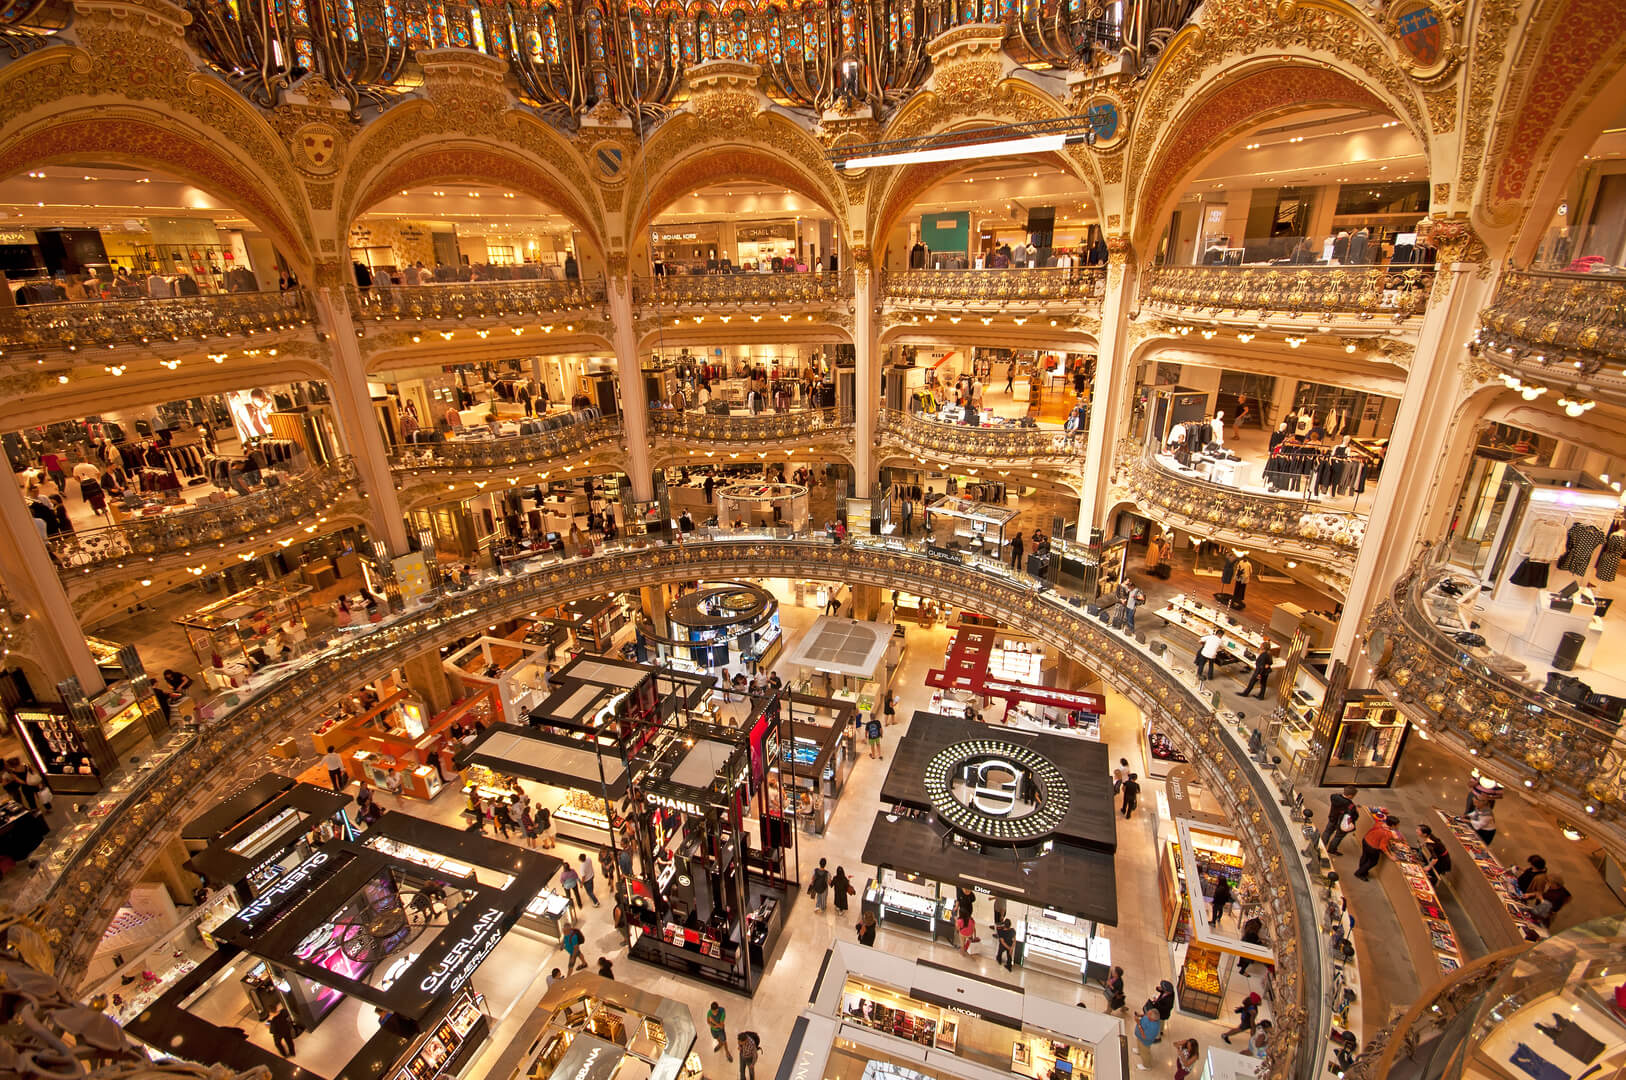 Galeries Lafayette interior in Paris. The architect Georges Chedanne designed the store where a Art Nouveau glass and steel dome was finished in 1912